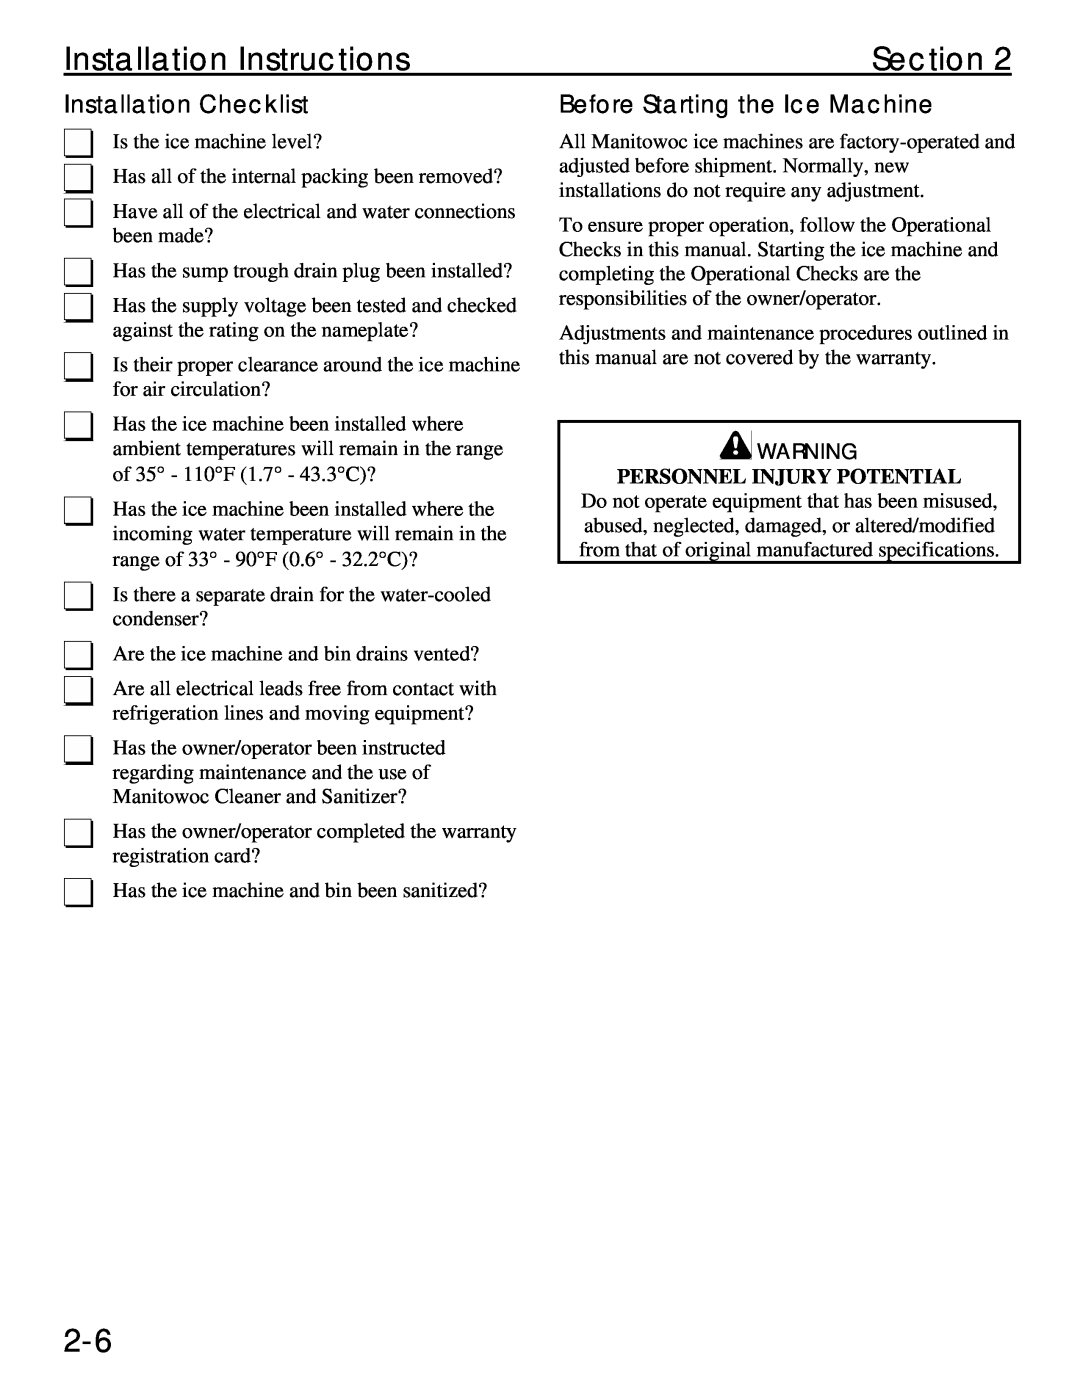 Manitowoc Ice Q 800 manual Installation Checklist, Before Starting the Ice Machine, Personnel Injury Potential, Section 